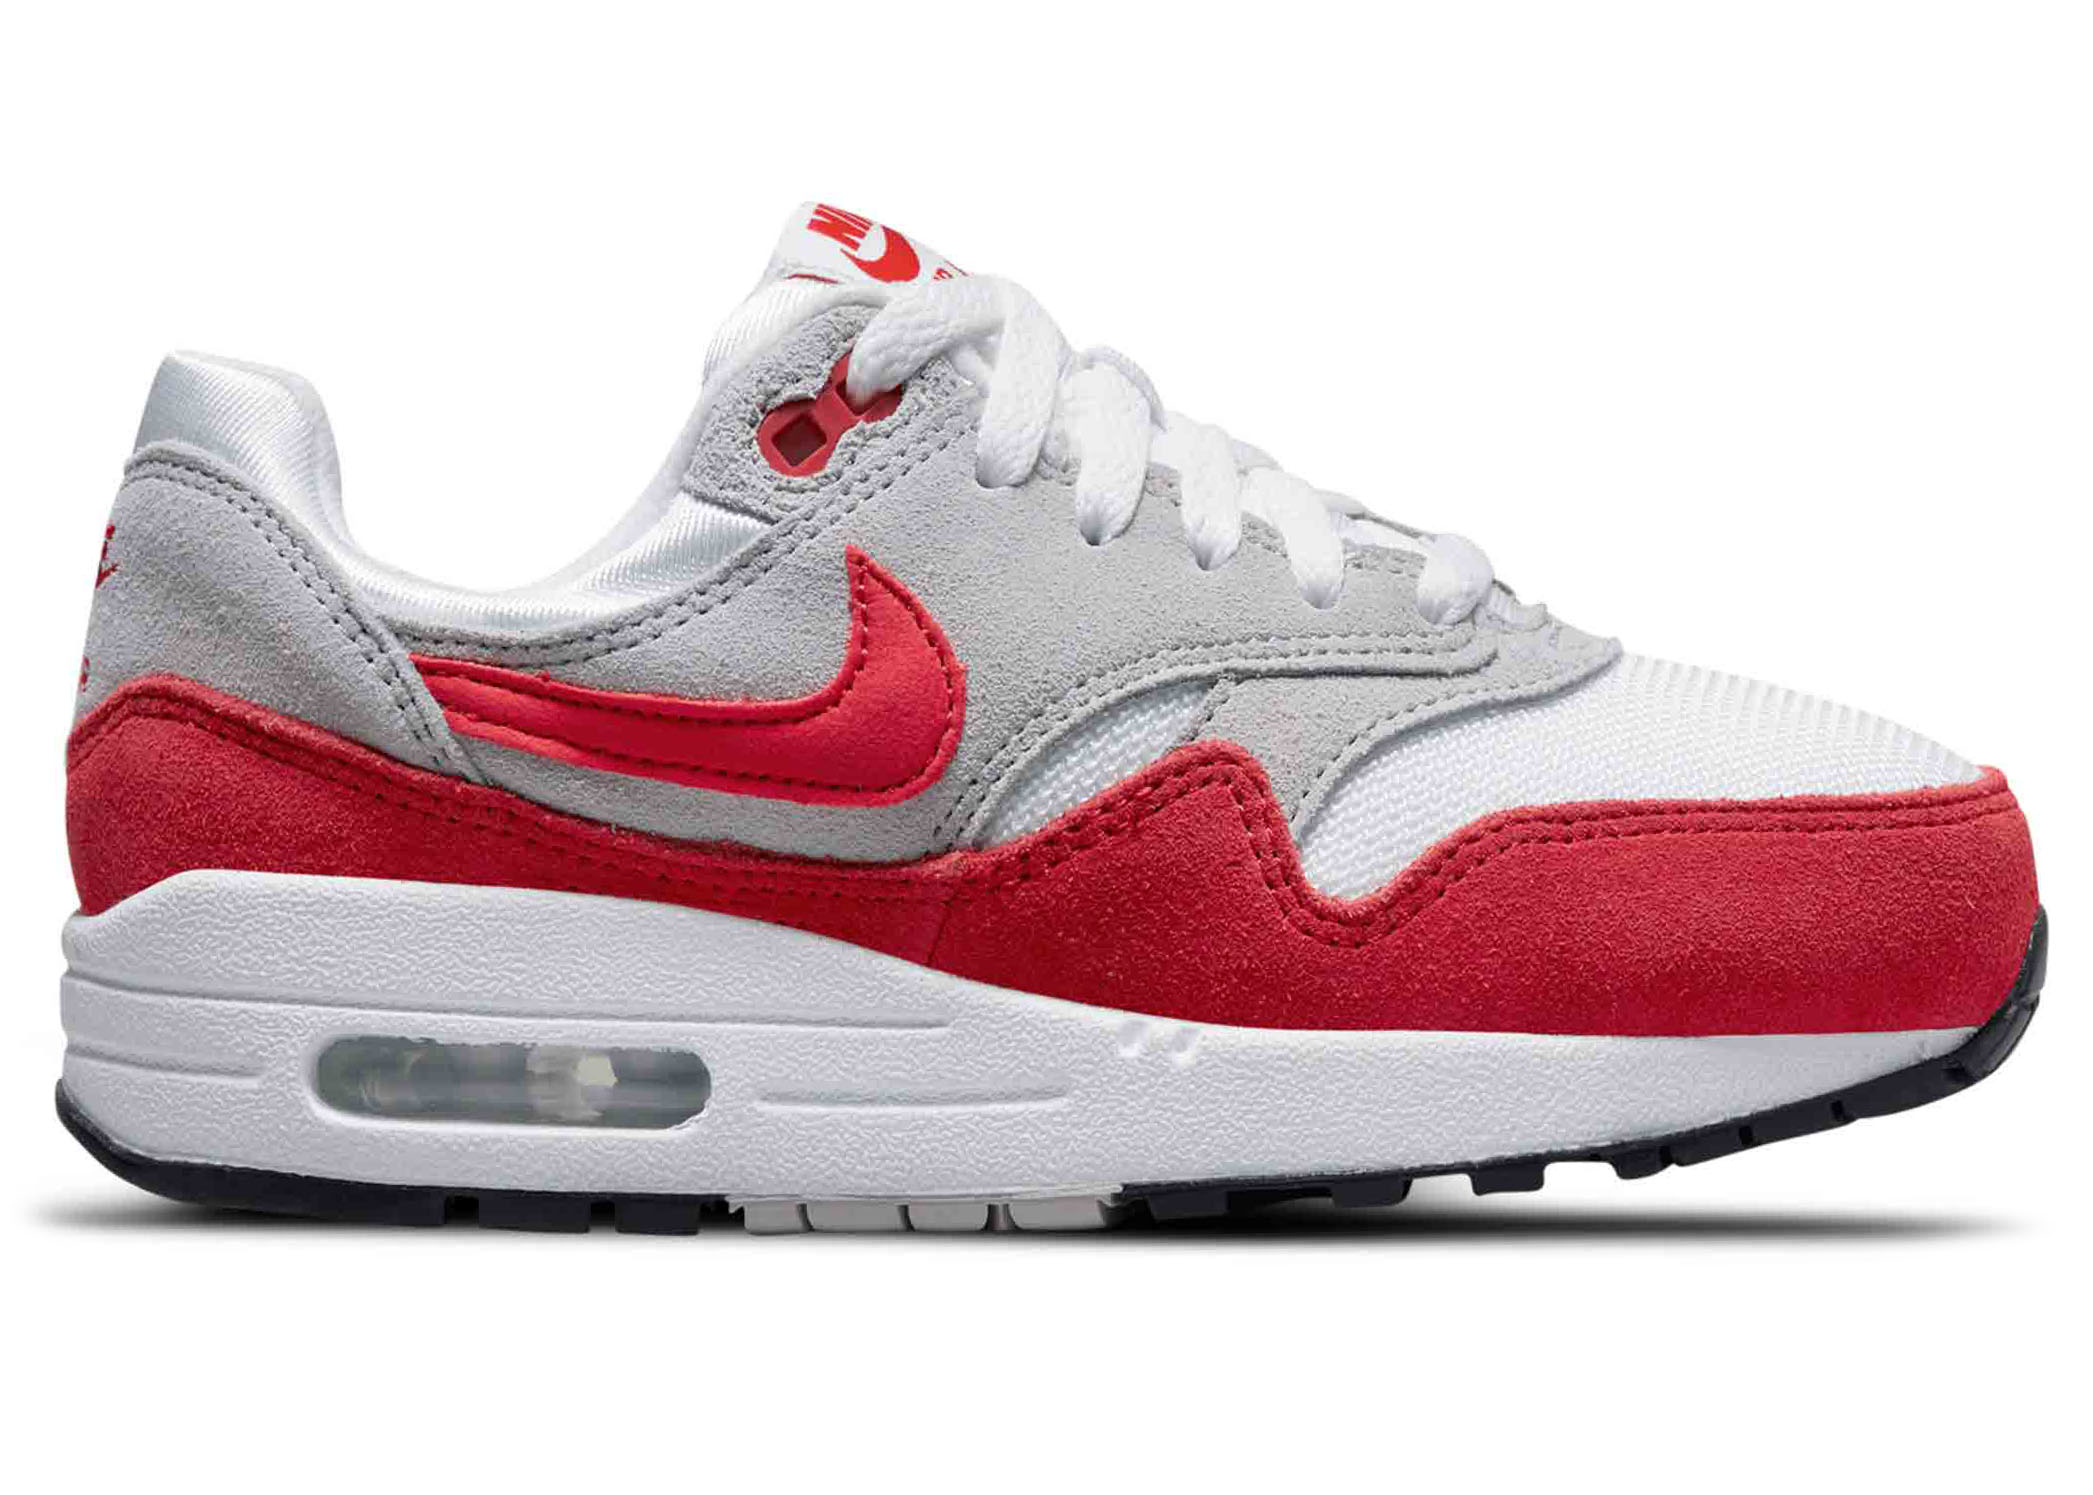 Nike Air Max 1 Challenge Red (GS) Kids' - 555766-146 - US